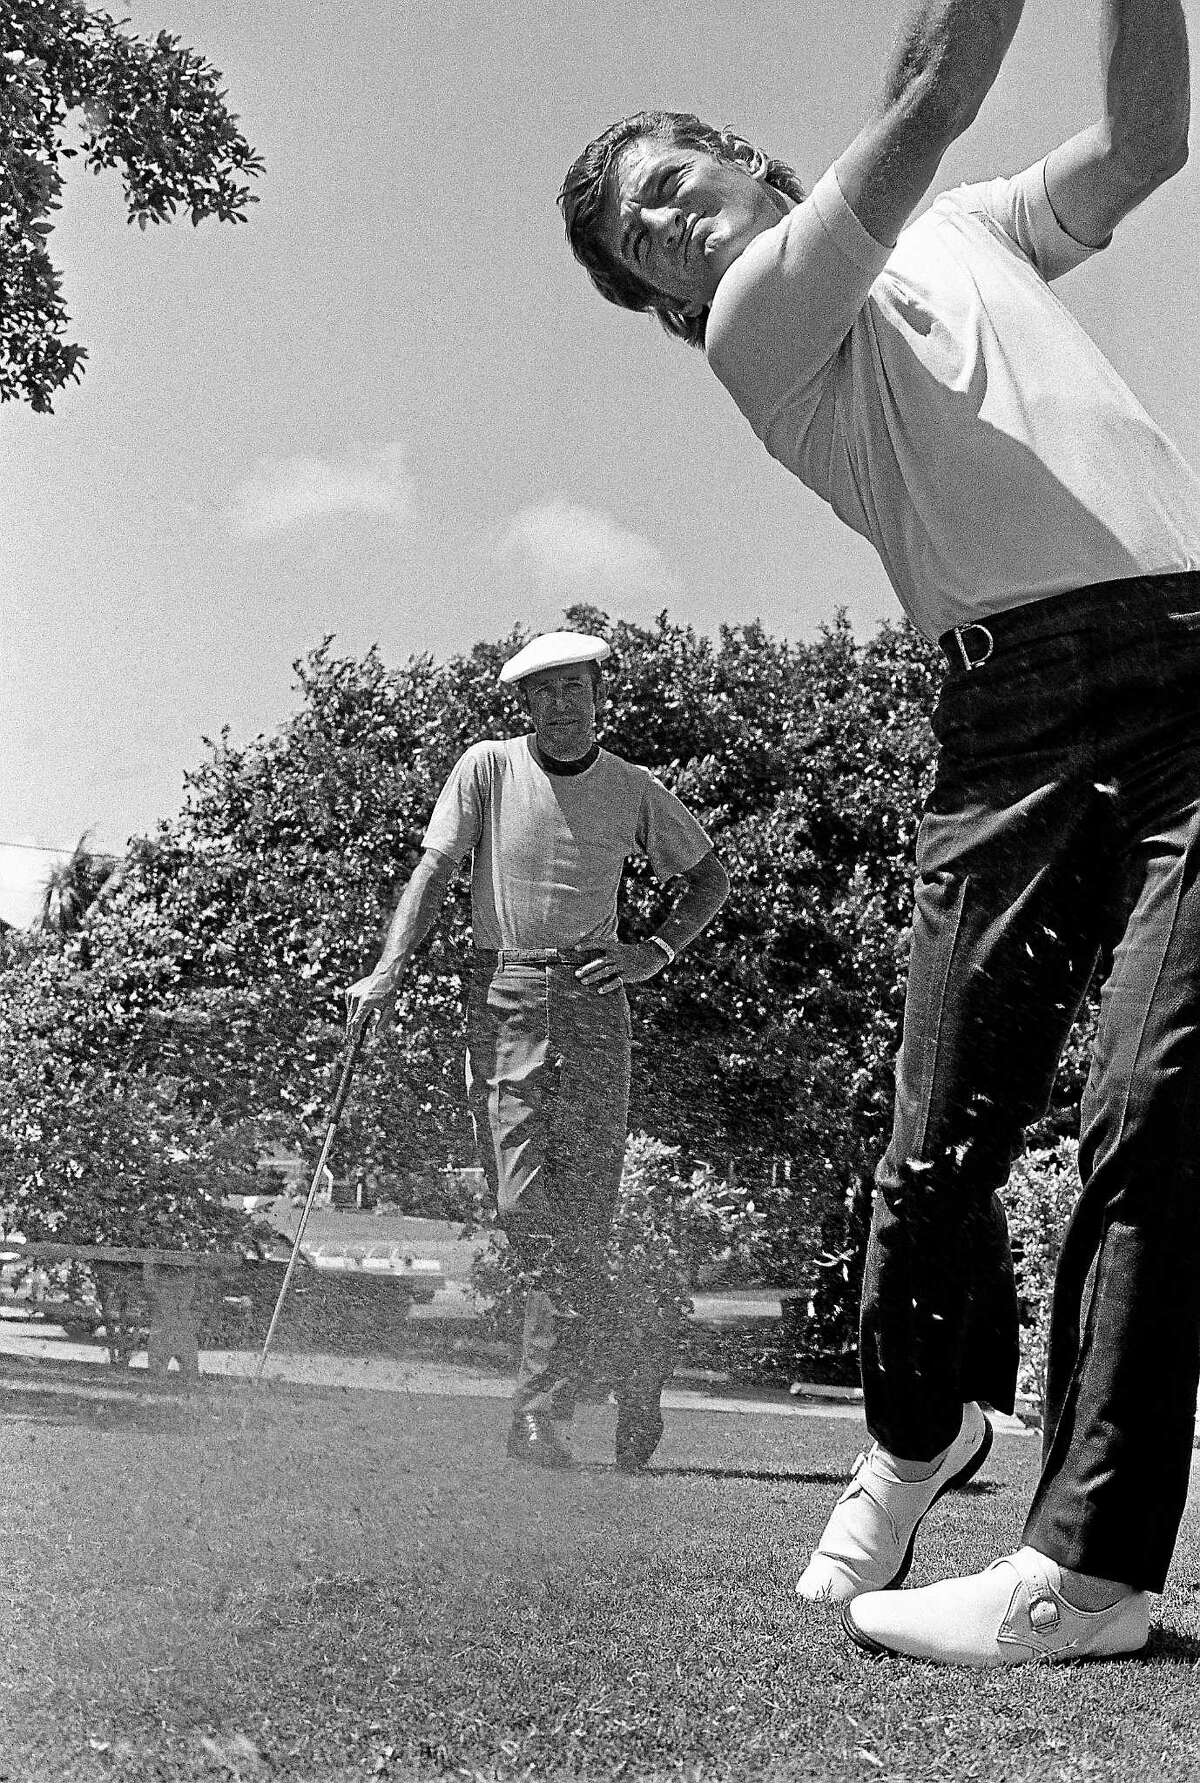 Former major league outfielder, and current Chicago White Sox broadcaster, Ken “Hawk” Harrelson follows through on his swing while his teacher, Bob Toski, look on during a practice session in September 1971. Ken Duke, the 2013 Travelers Championship winner, is a current pupil of the 87-year-old Toski, who recently returned to the scene of his 1953 Insurance City Open tournament victory.